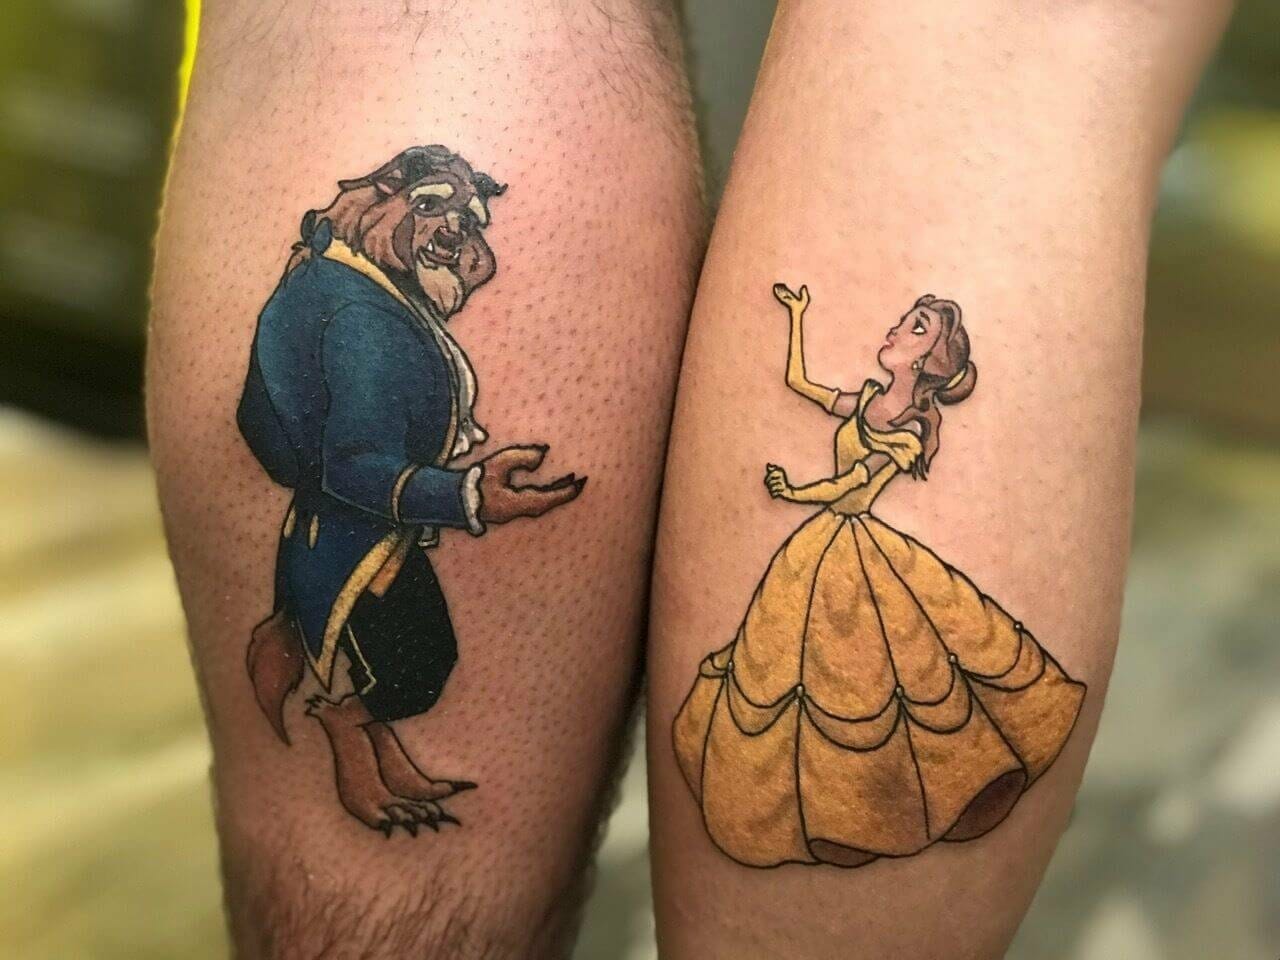 White Lotus Tattoo Studio  Mrs Potts and chip done by Rachael  Facebook